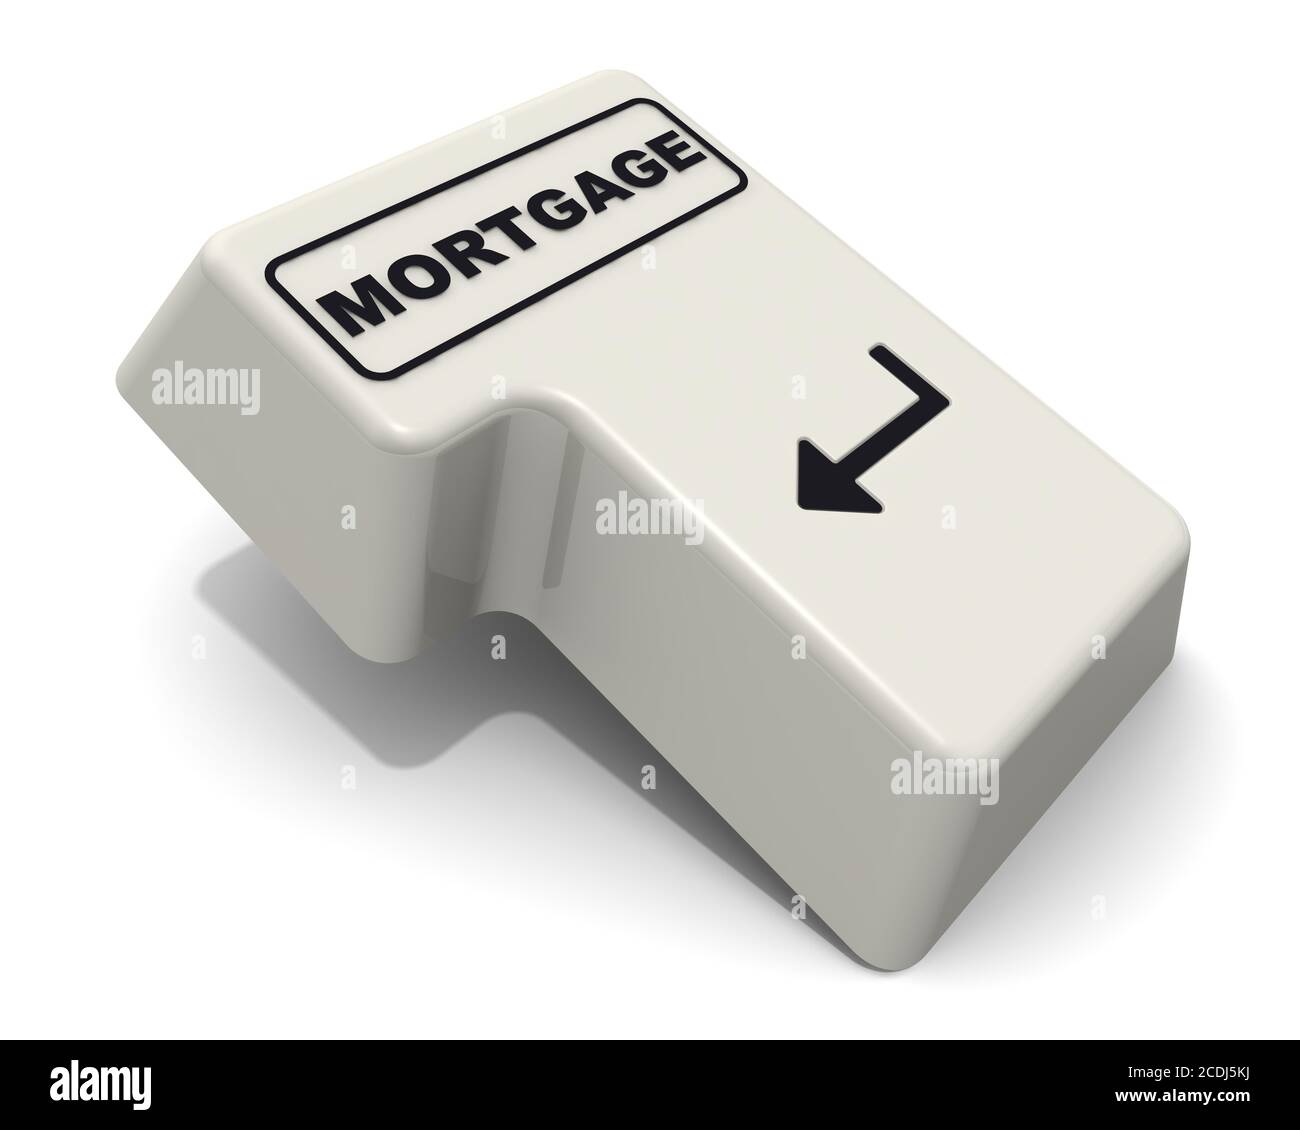 The enter key labeled mortgage. Computer Enter key with black text MORTGAGE isolated on white background. 3D Illustration Stock Photo